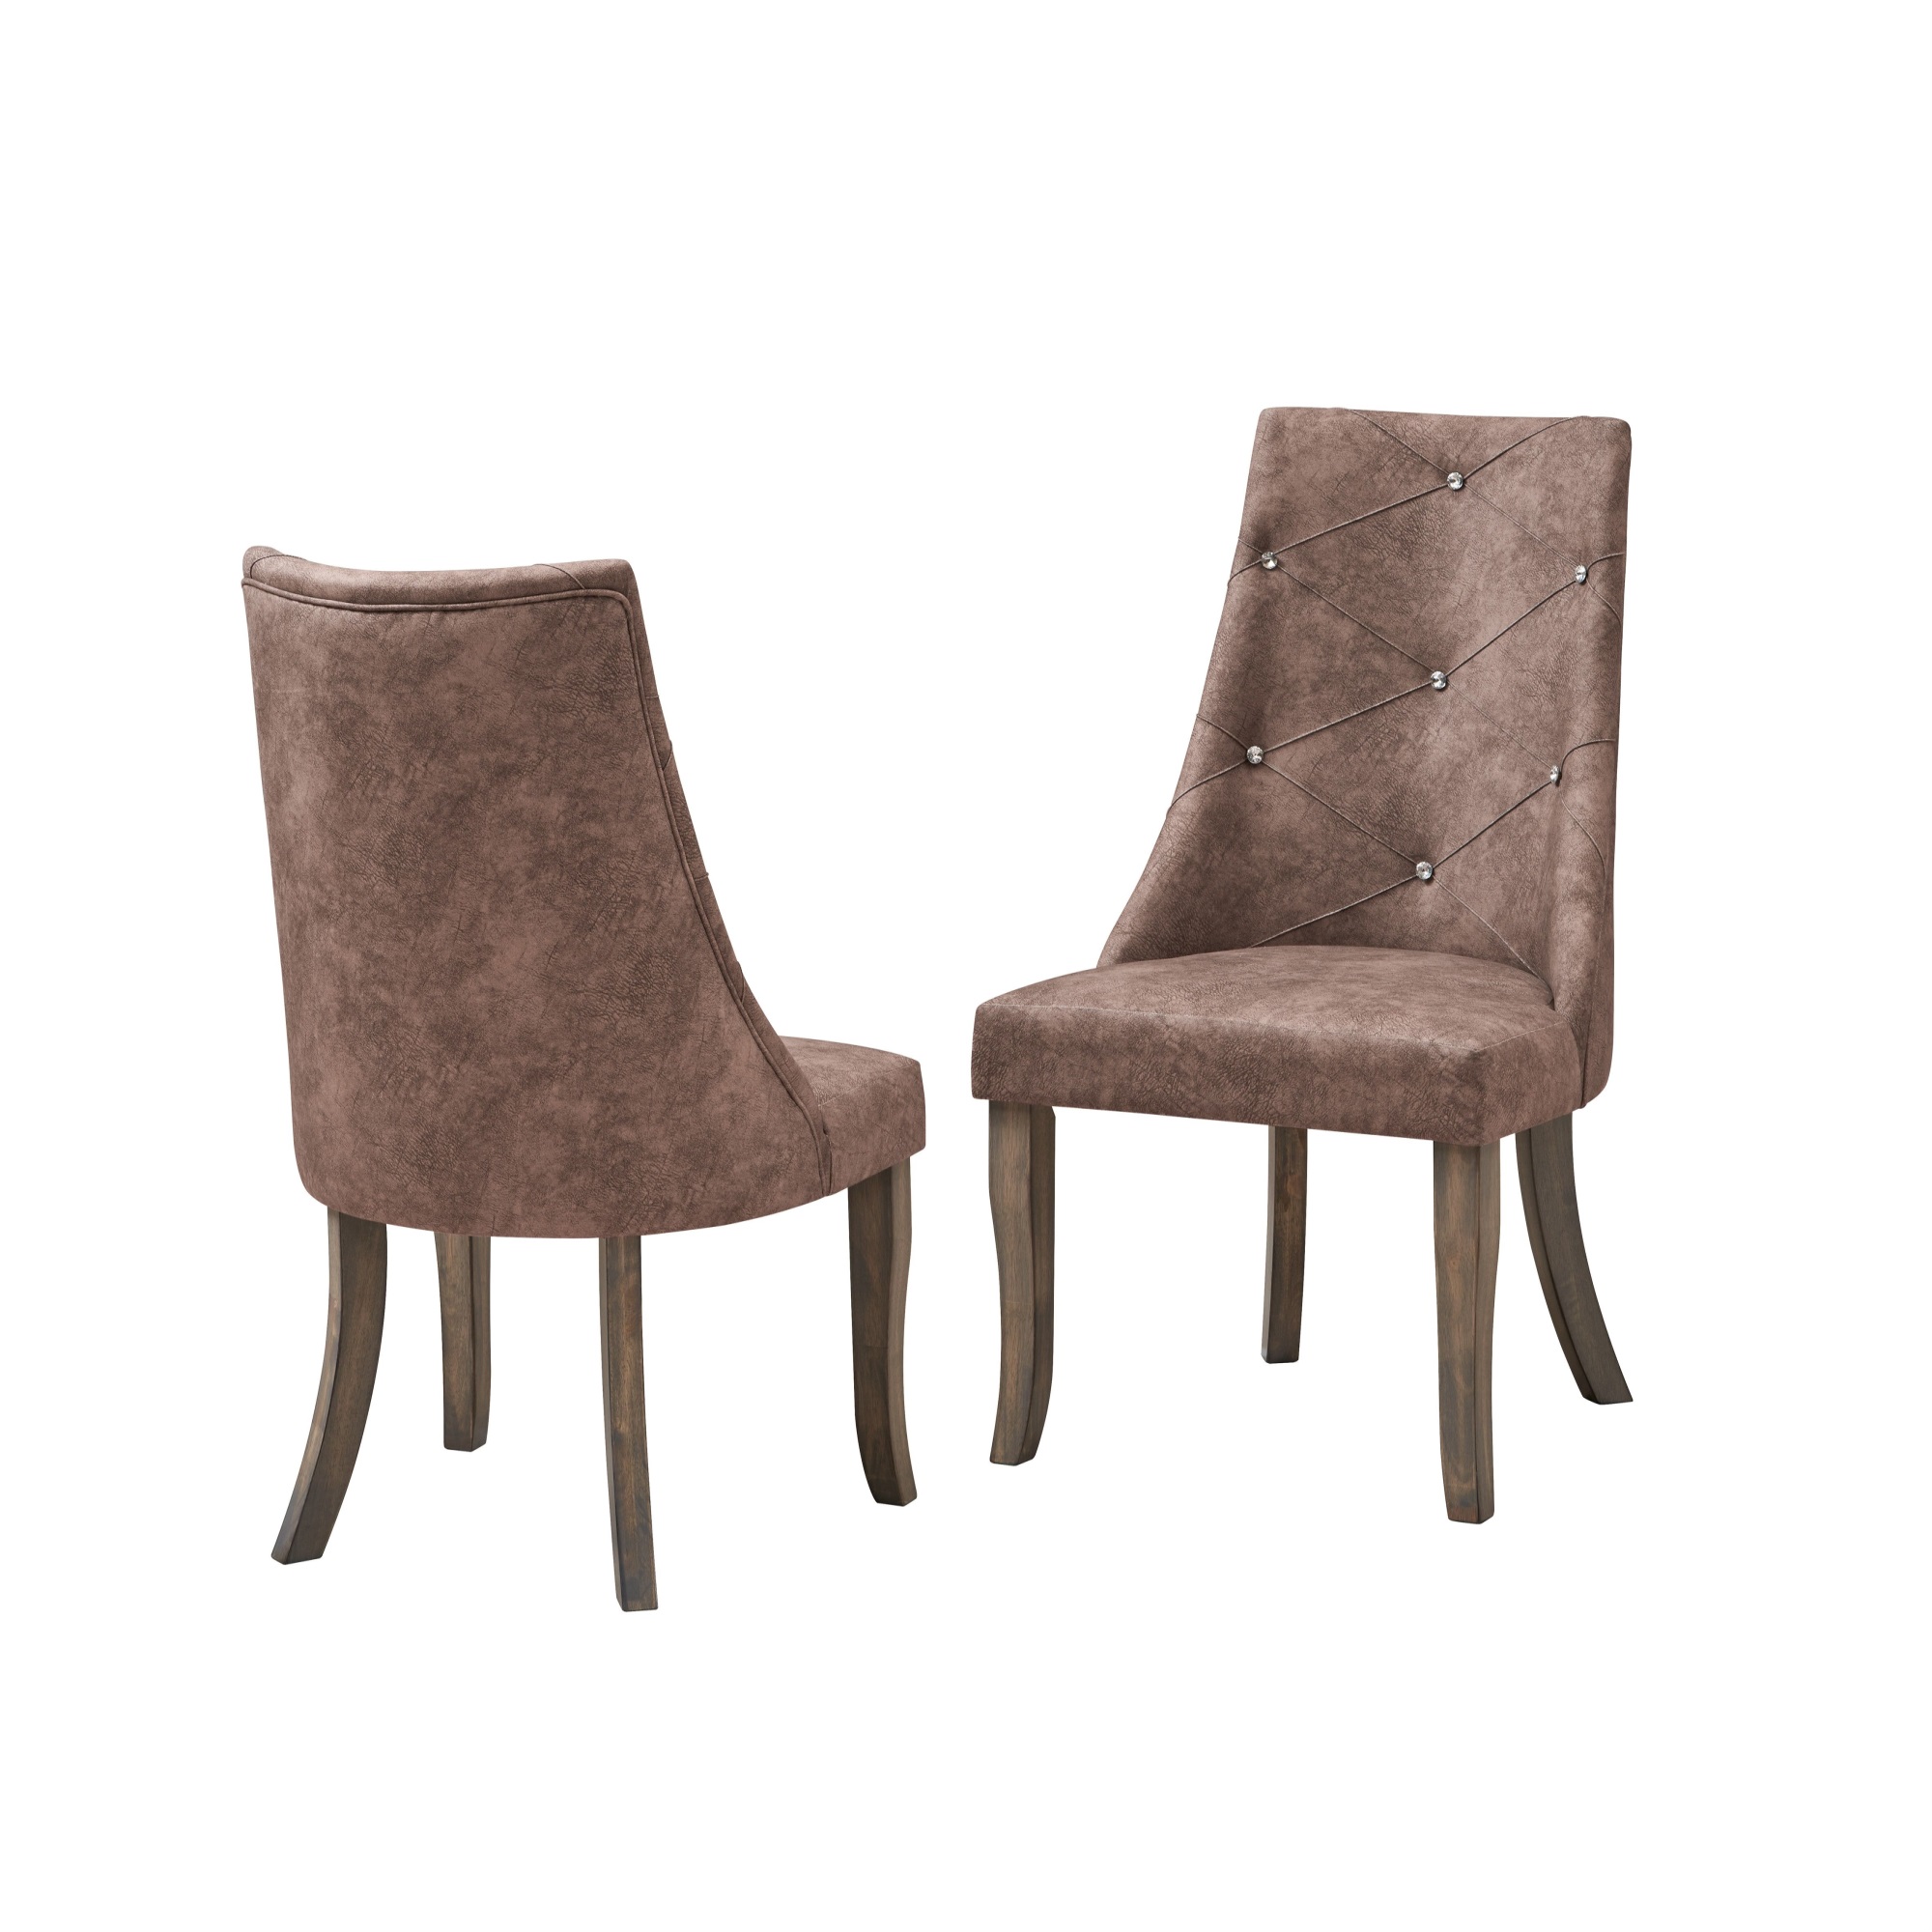 Pilaster Designs Benoit Crystal Tufted Upholstered Dining Side Chairs, Dark Brown Fabric & Gray Wood (Set of 2)